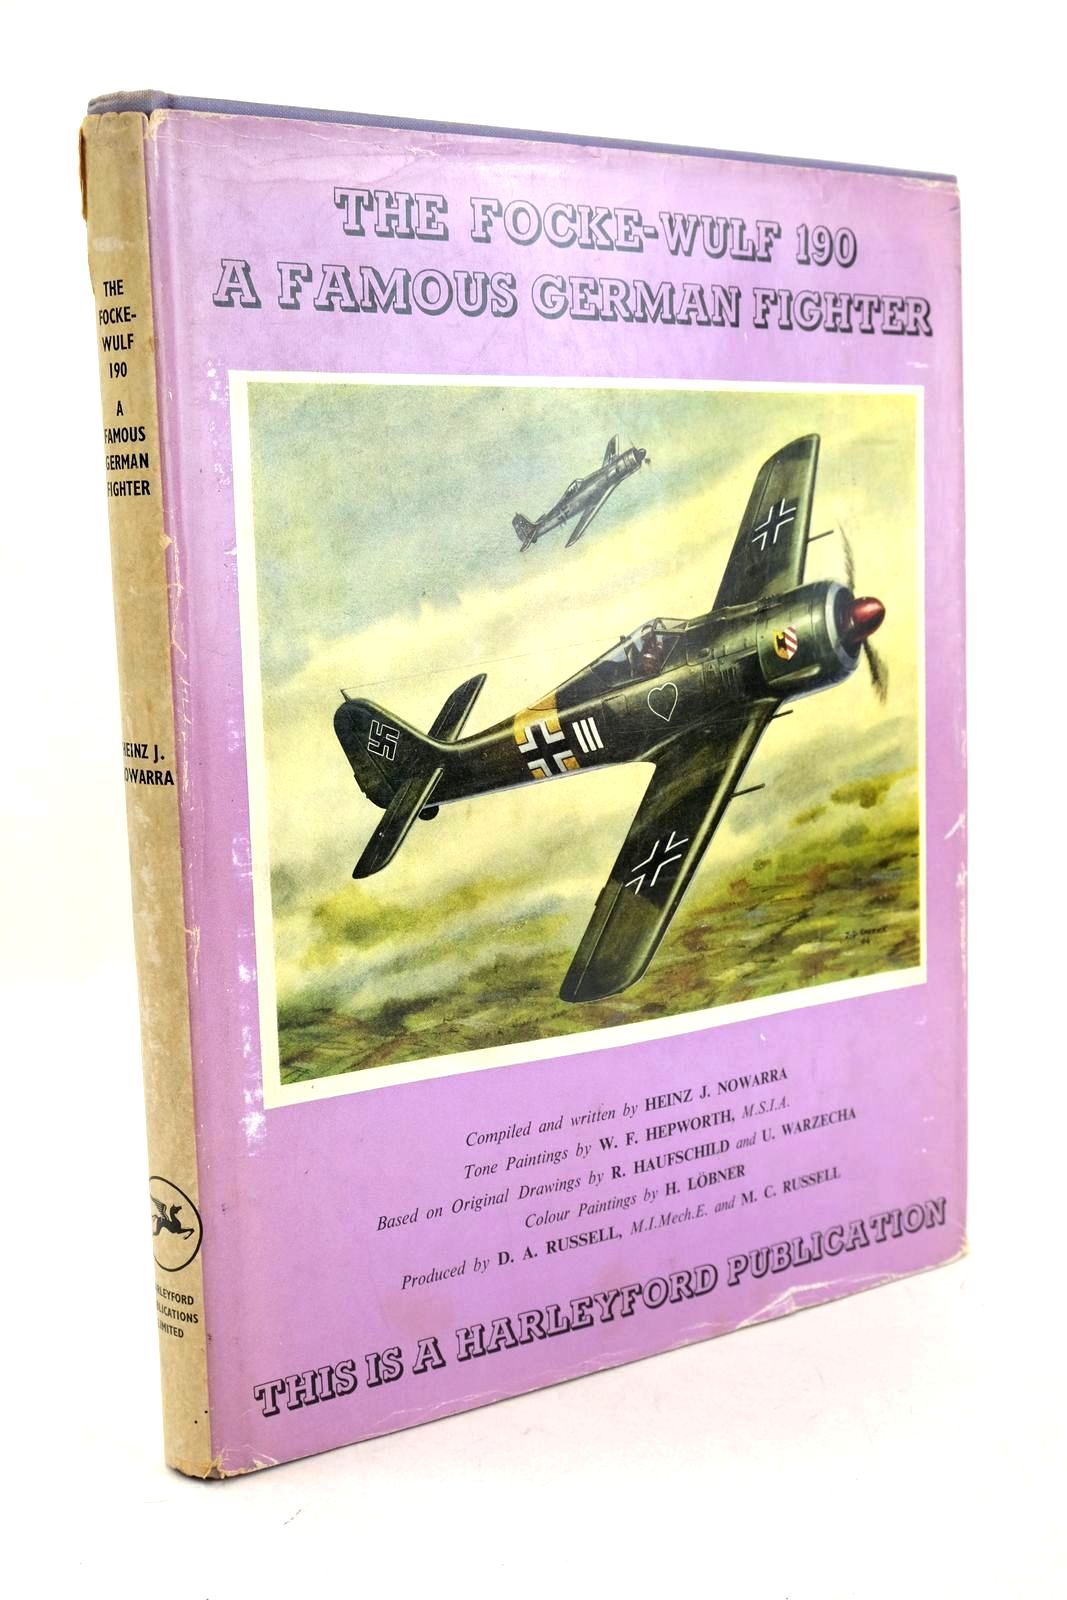 Photo of THE FOCKE-WULF 190 A FAMOUS GERMAN FIGHTER written by Nowarra, Heinz J. illustrated by Hepworth, W.F. published by Harleyford Publications Limited (STOCK CODE: 1326650)  for sale by Stella & Rose's Books